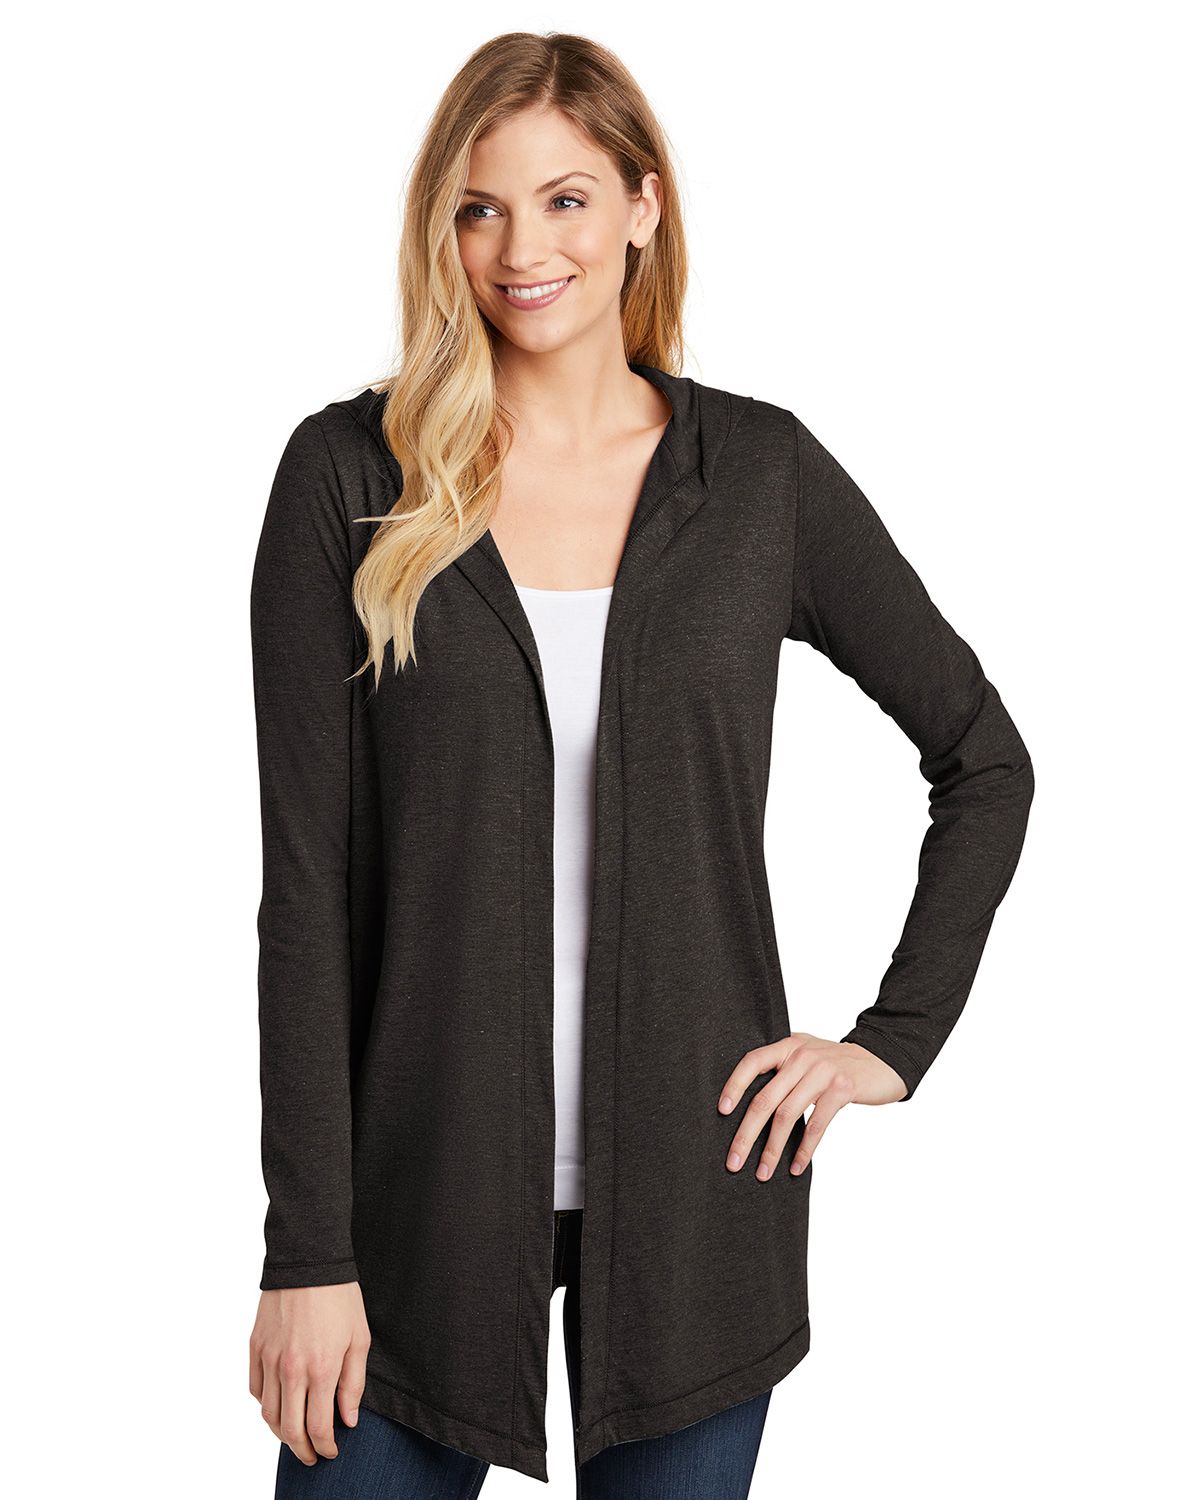 Size Chart for District DT156 Women's Perfect Tri Hooded Cardigan